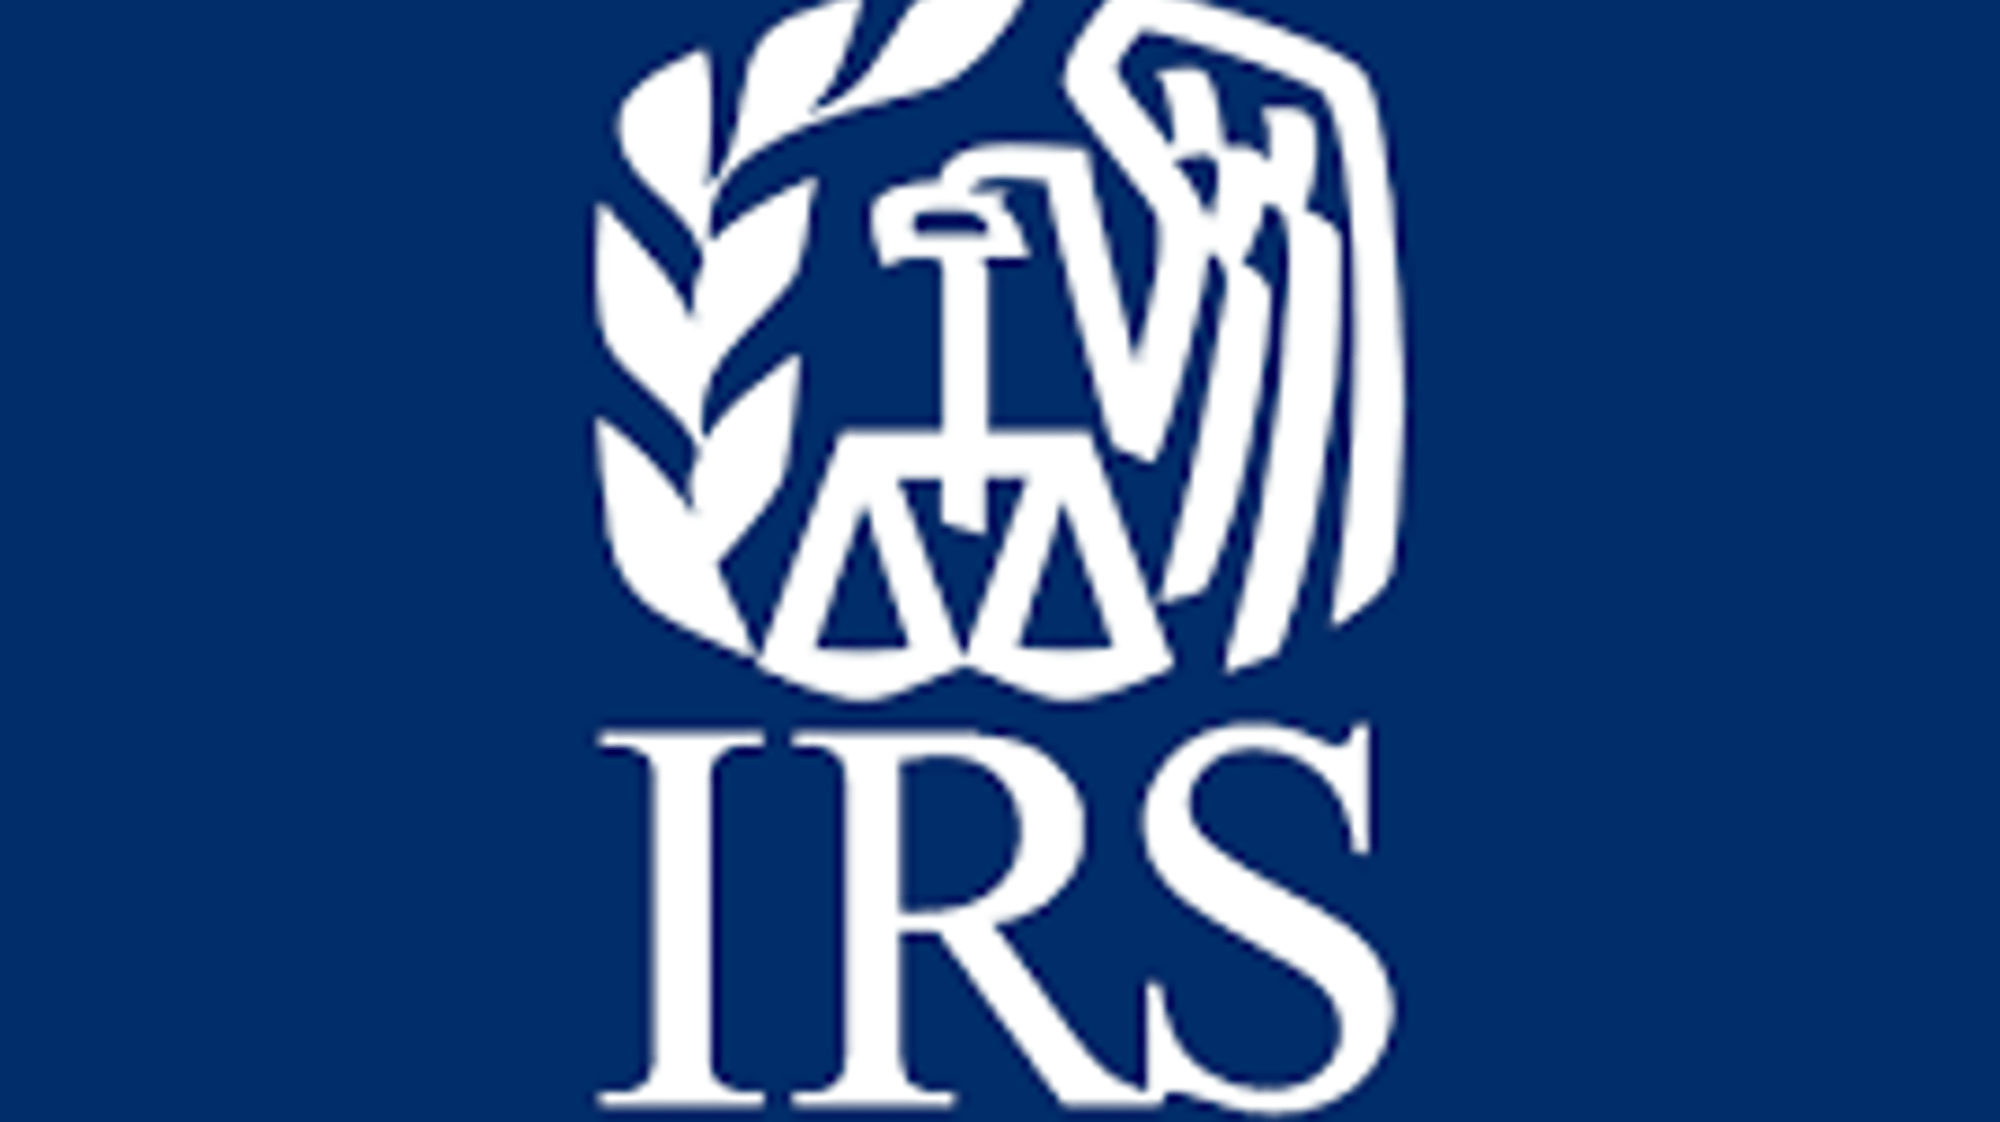 THE IRS